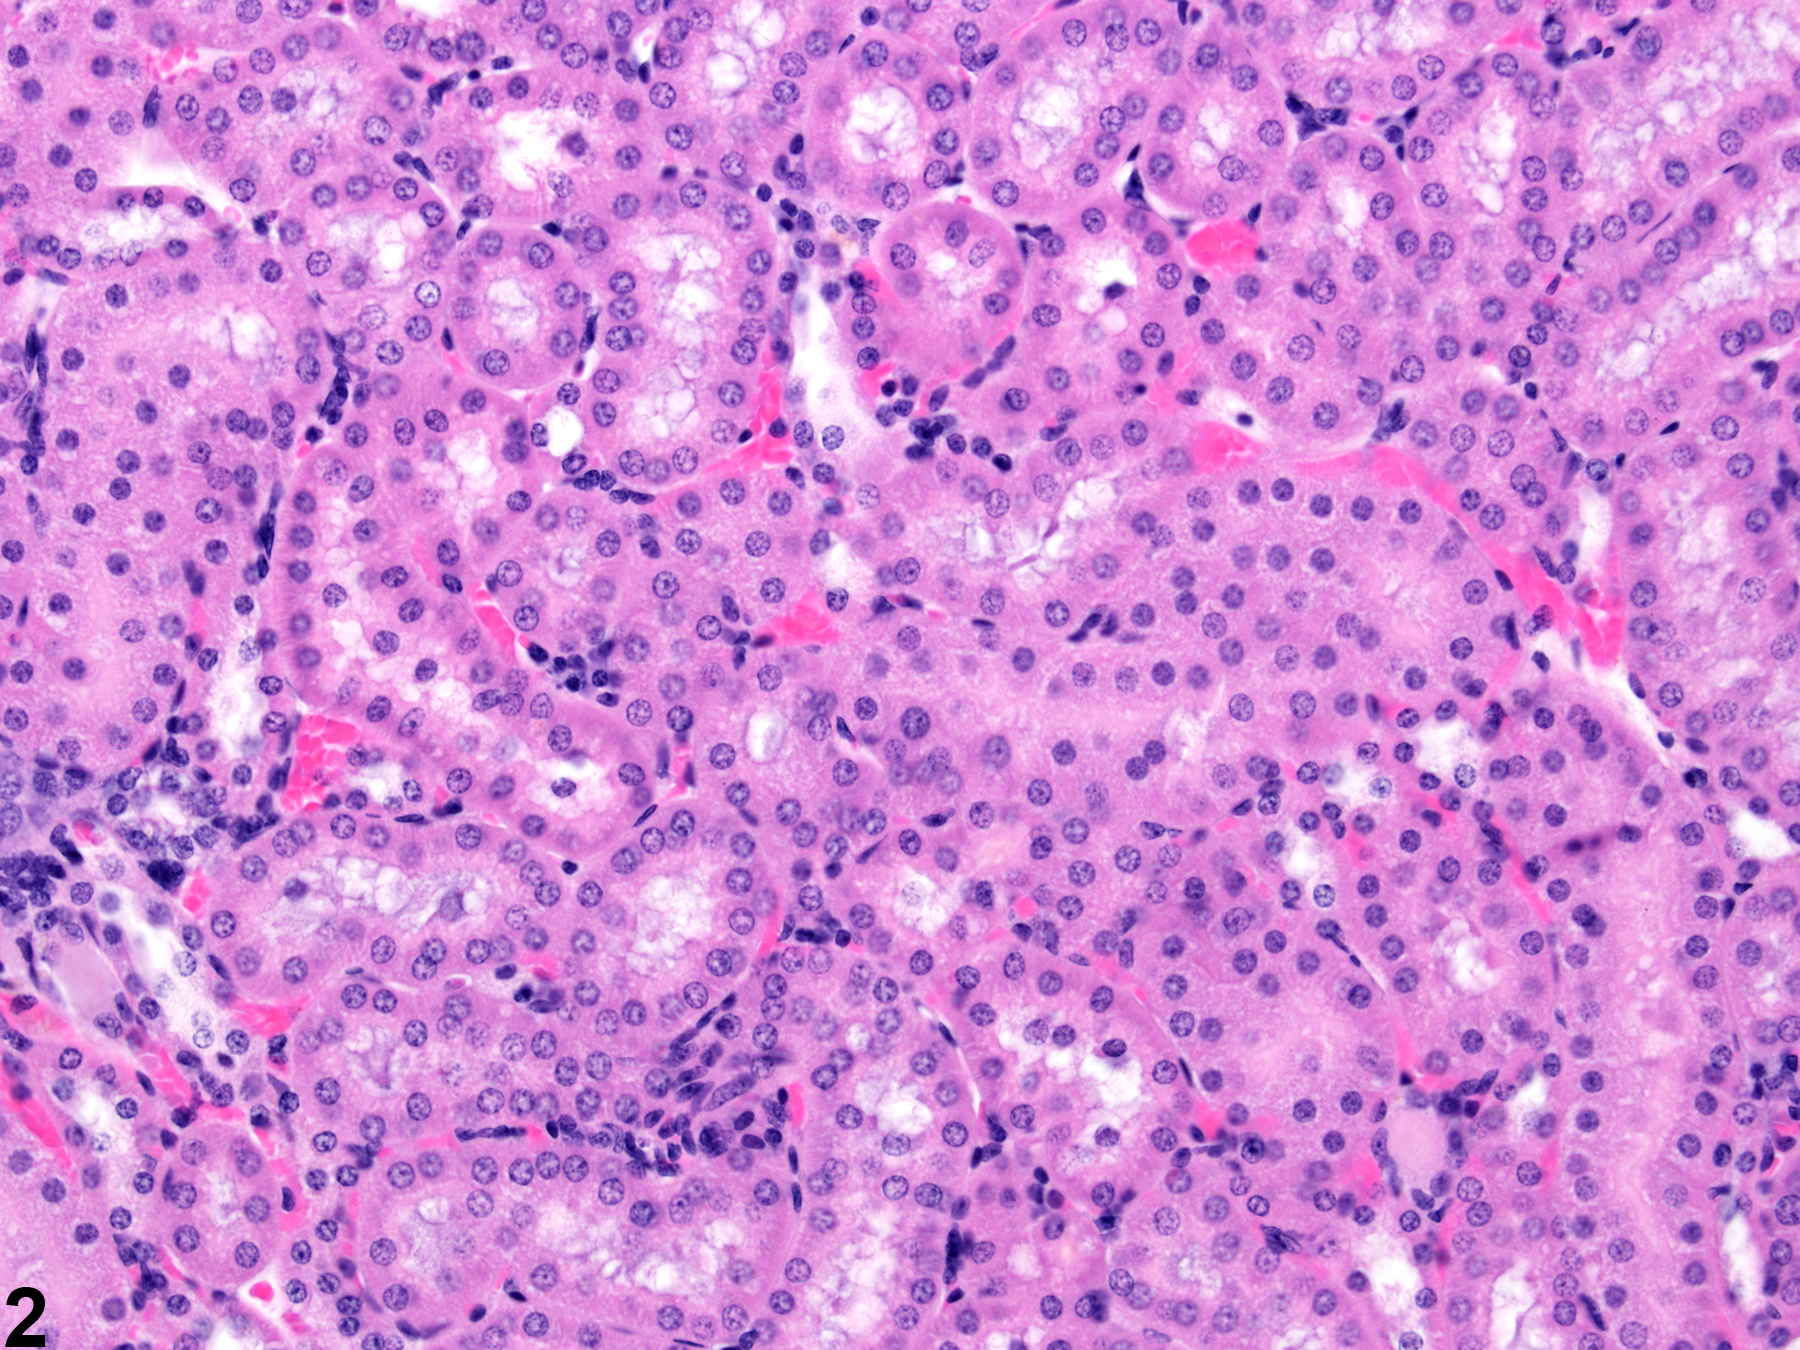 Image of cytoplasmic alteration in the kidney from a male B6C3F1 mouse in a chronic study